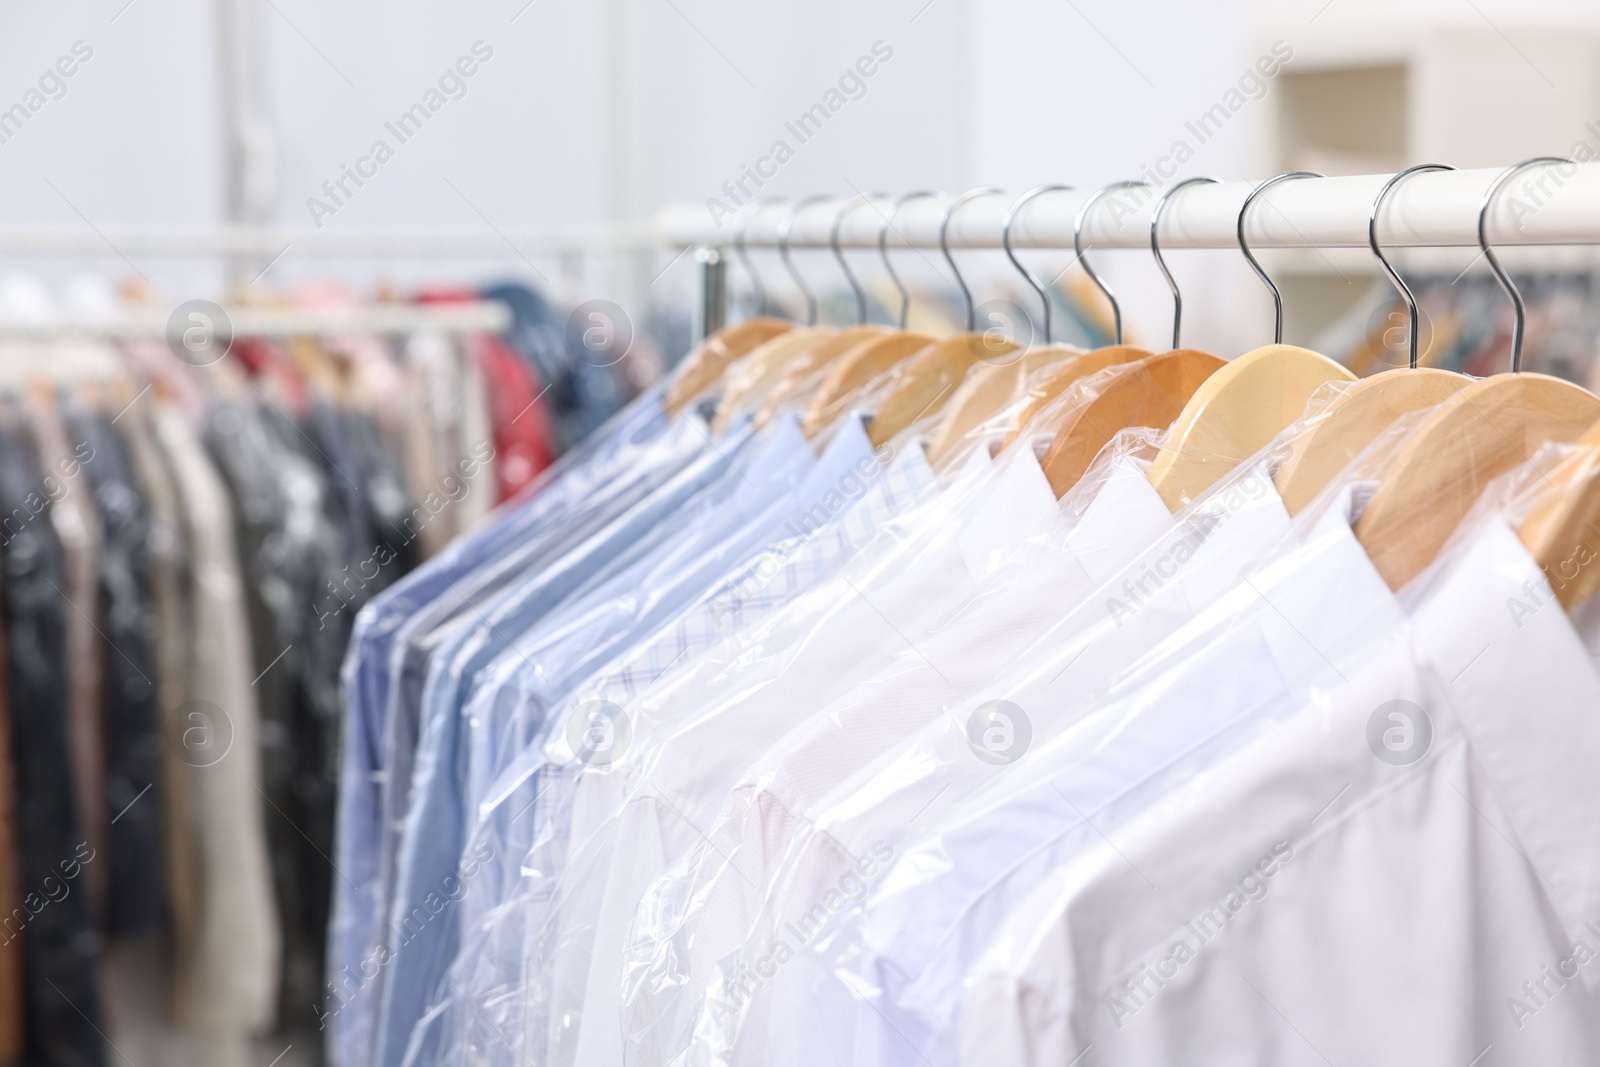 Photo of Dry-cleaning service. Many different clothes in plastic bags hanging on rack indoors, closeup